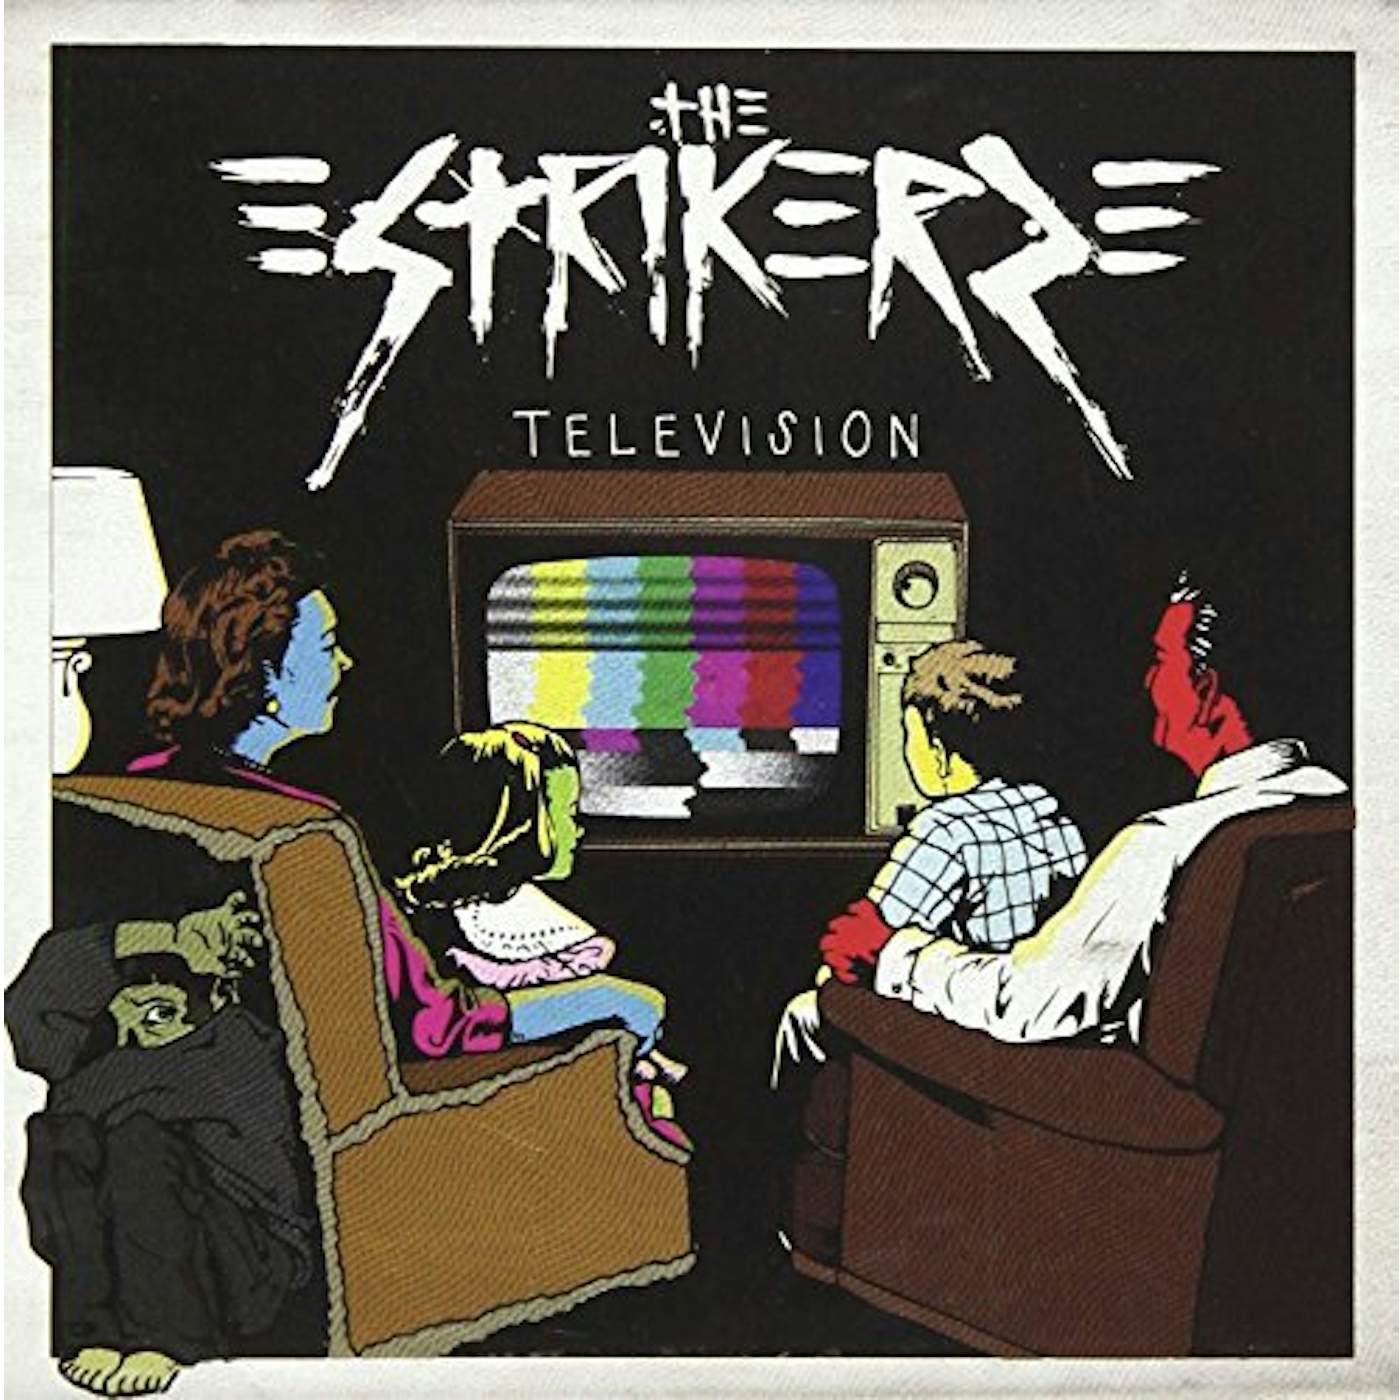 Strikers TELEVISION CD